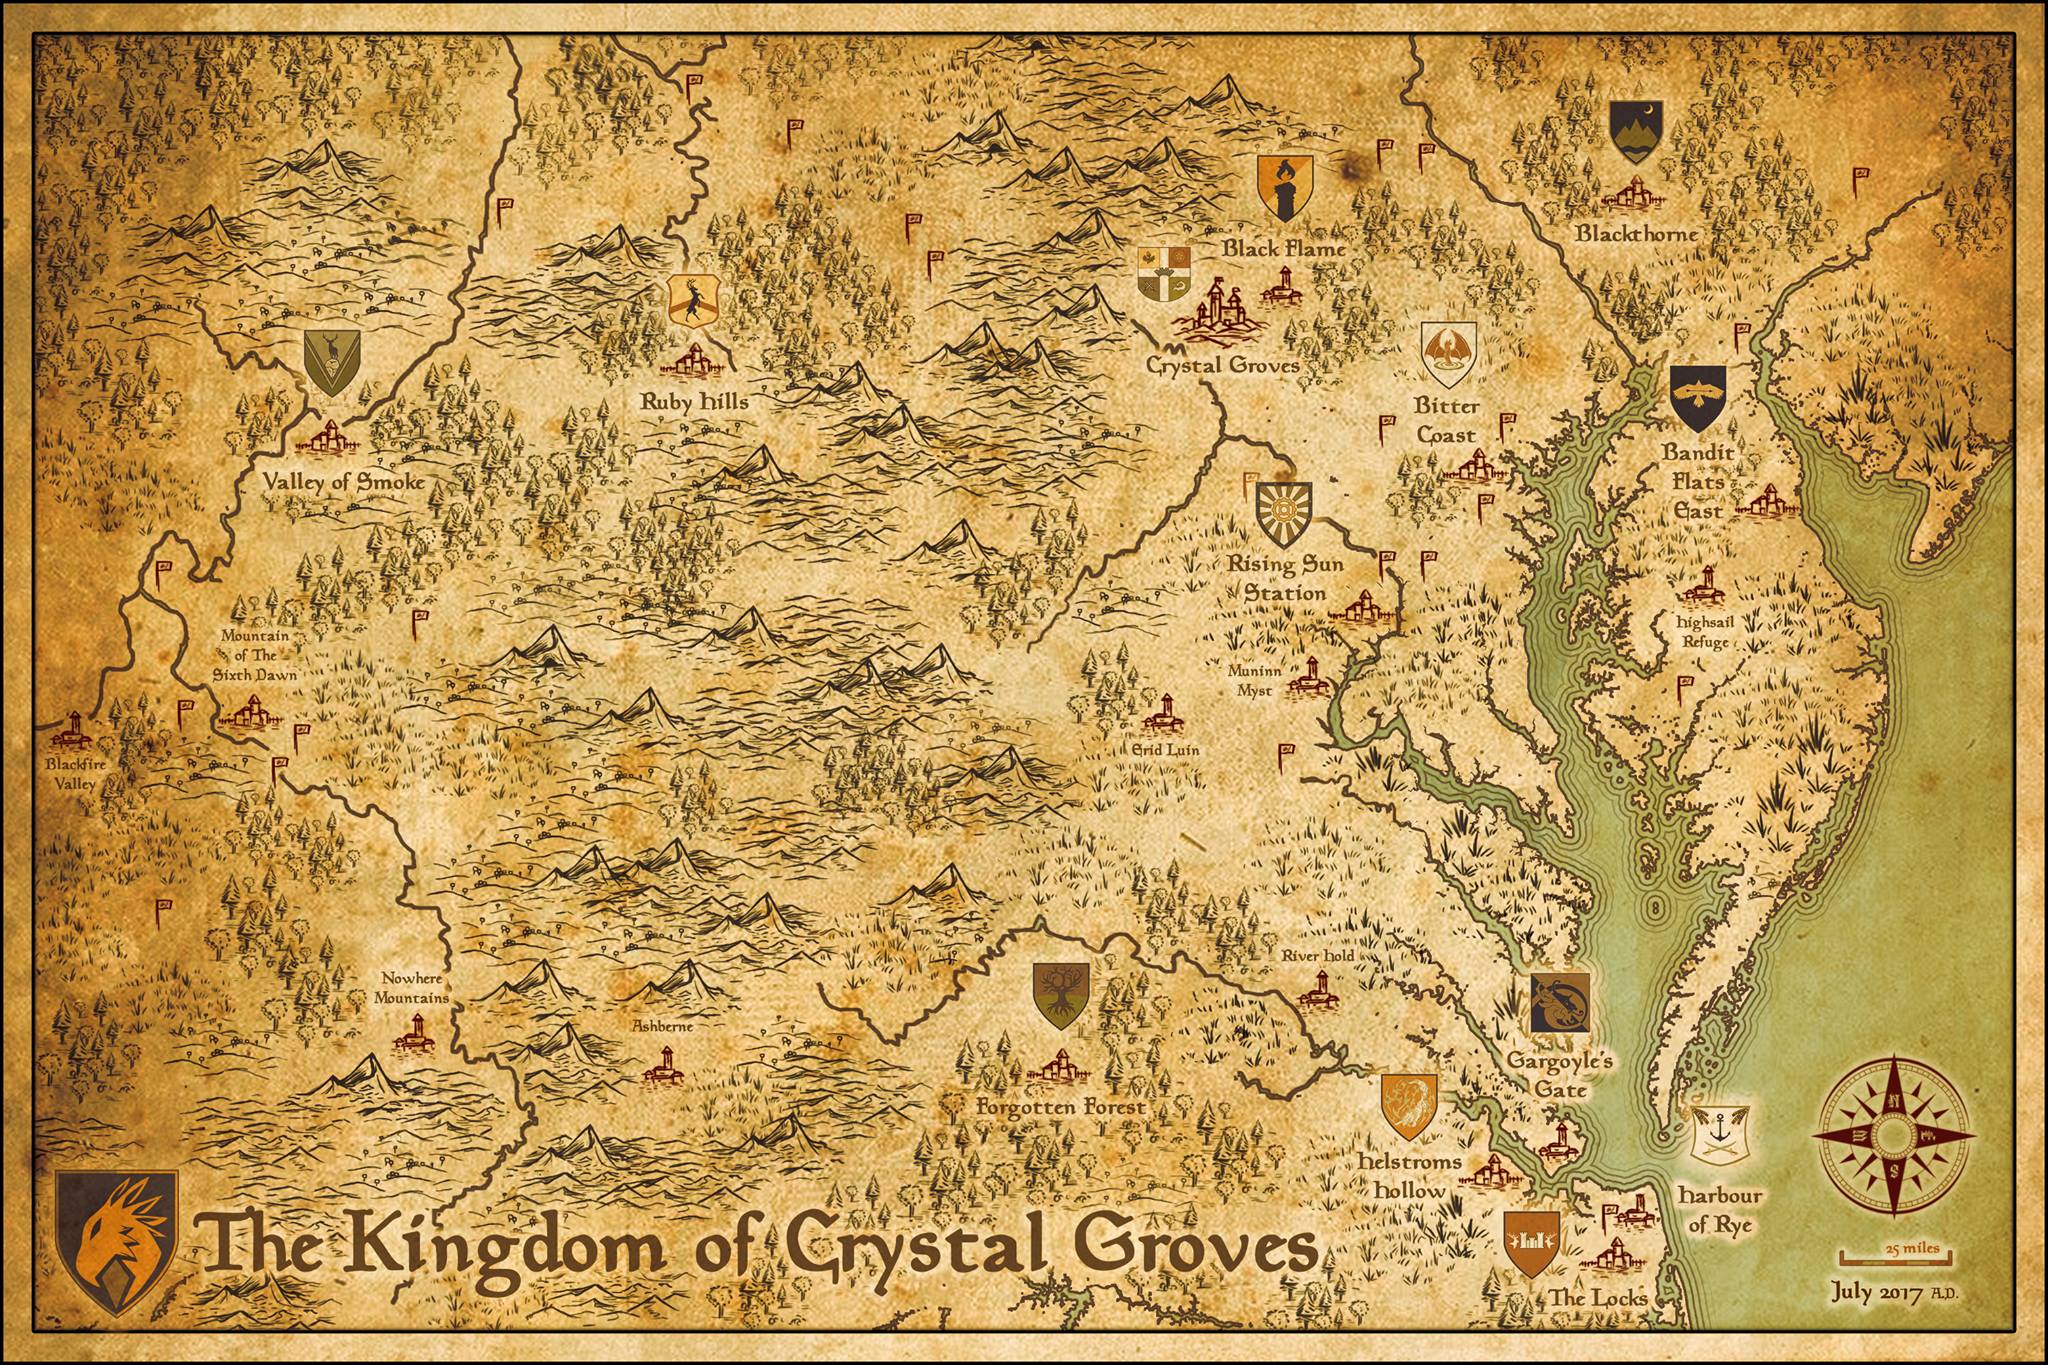 Map of the Kingdom of Crystal Groves, created by Bagel